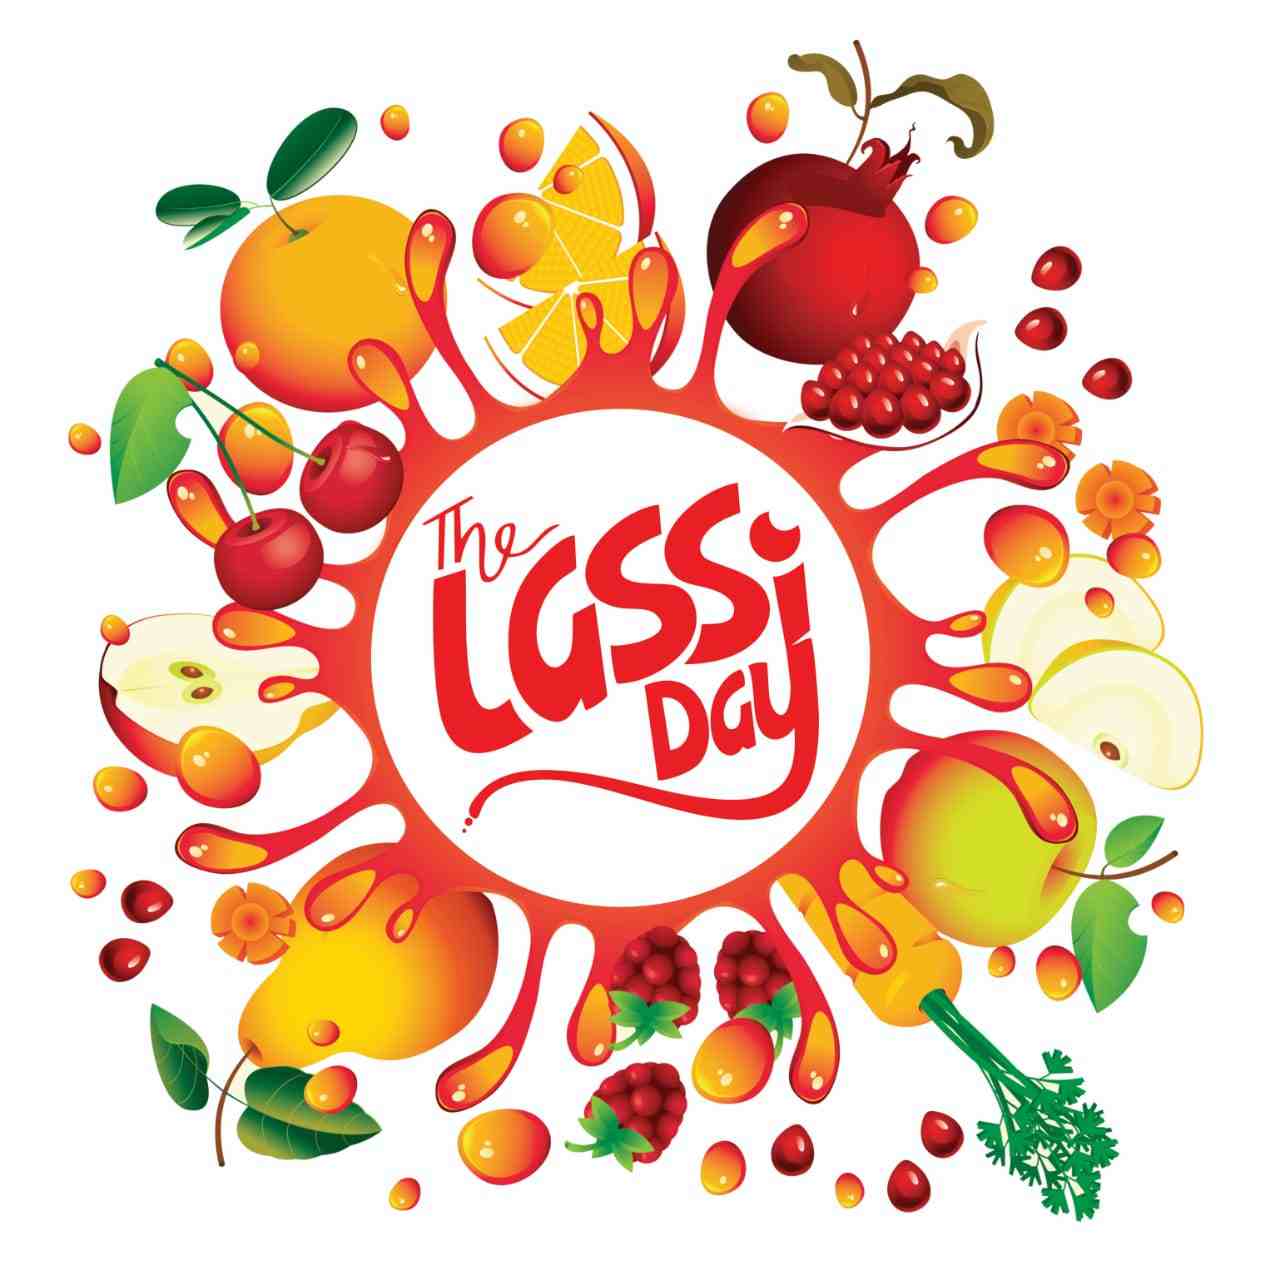 The lassi day franchise in India - FranchiseDiscovery